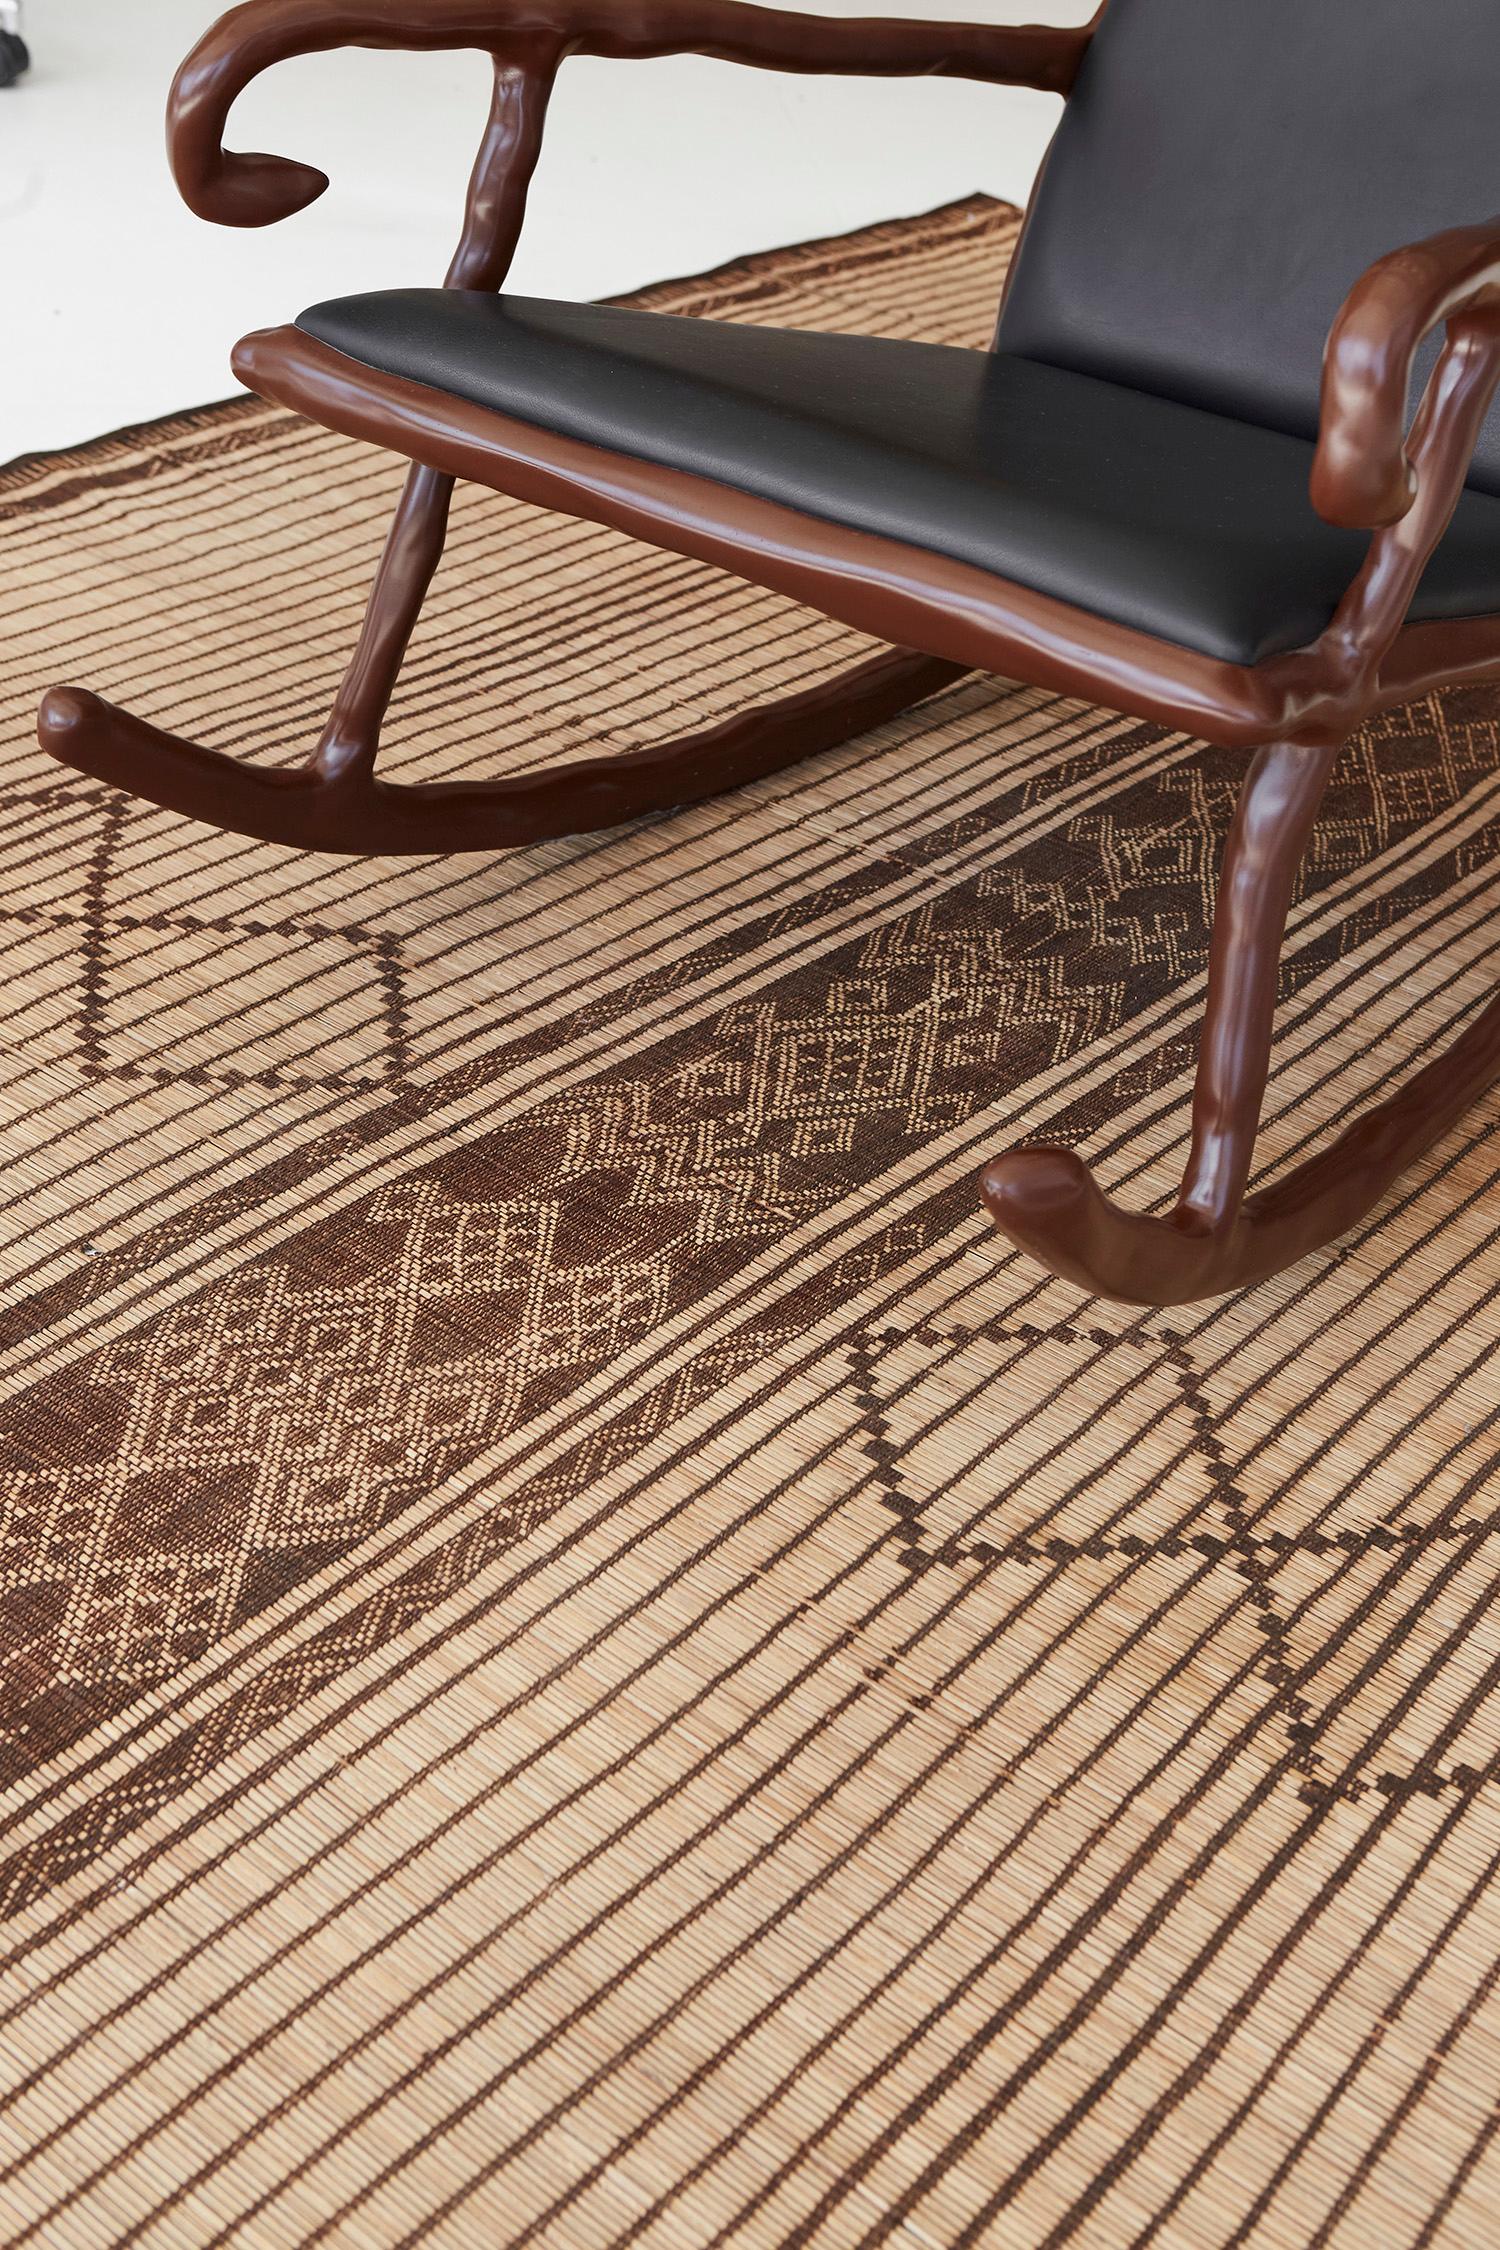 Embellish your room with so much history and sophistication with our Tuareg mat. It highlights the diamond patterns and Berber symbols on its core which these strong details brighten up the mood. Known for their durability, these are made from reed